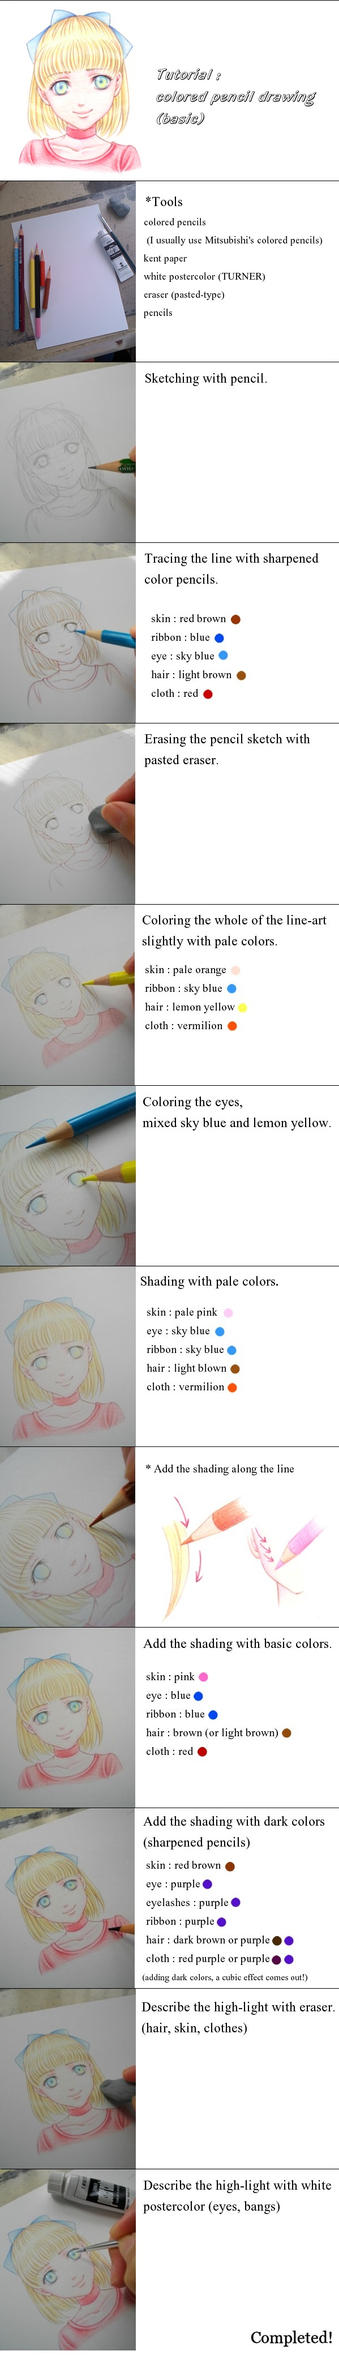 Tutorial colored pencil drawing by Calur on DeviantArt